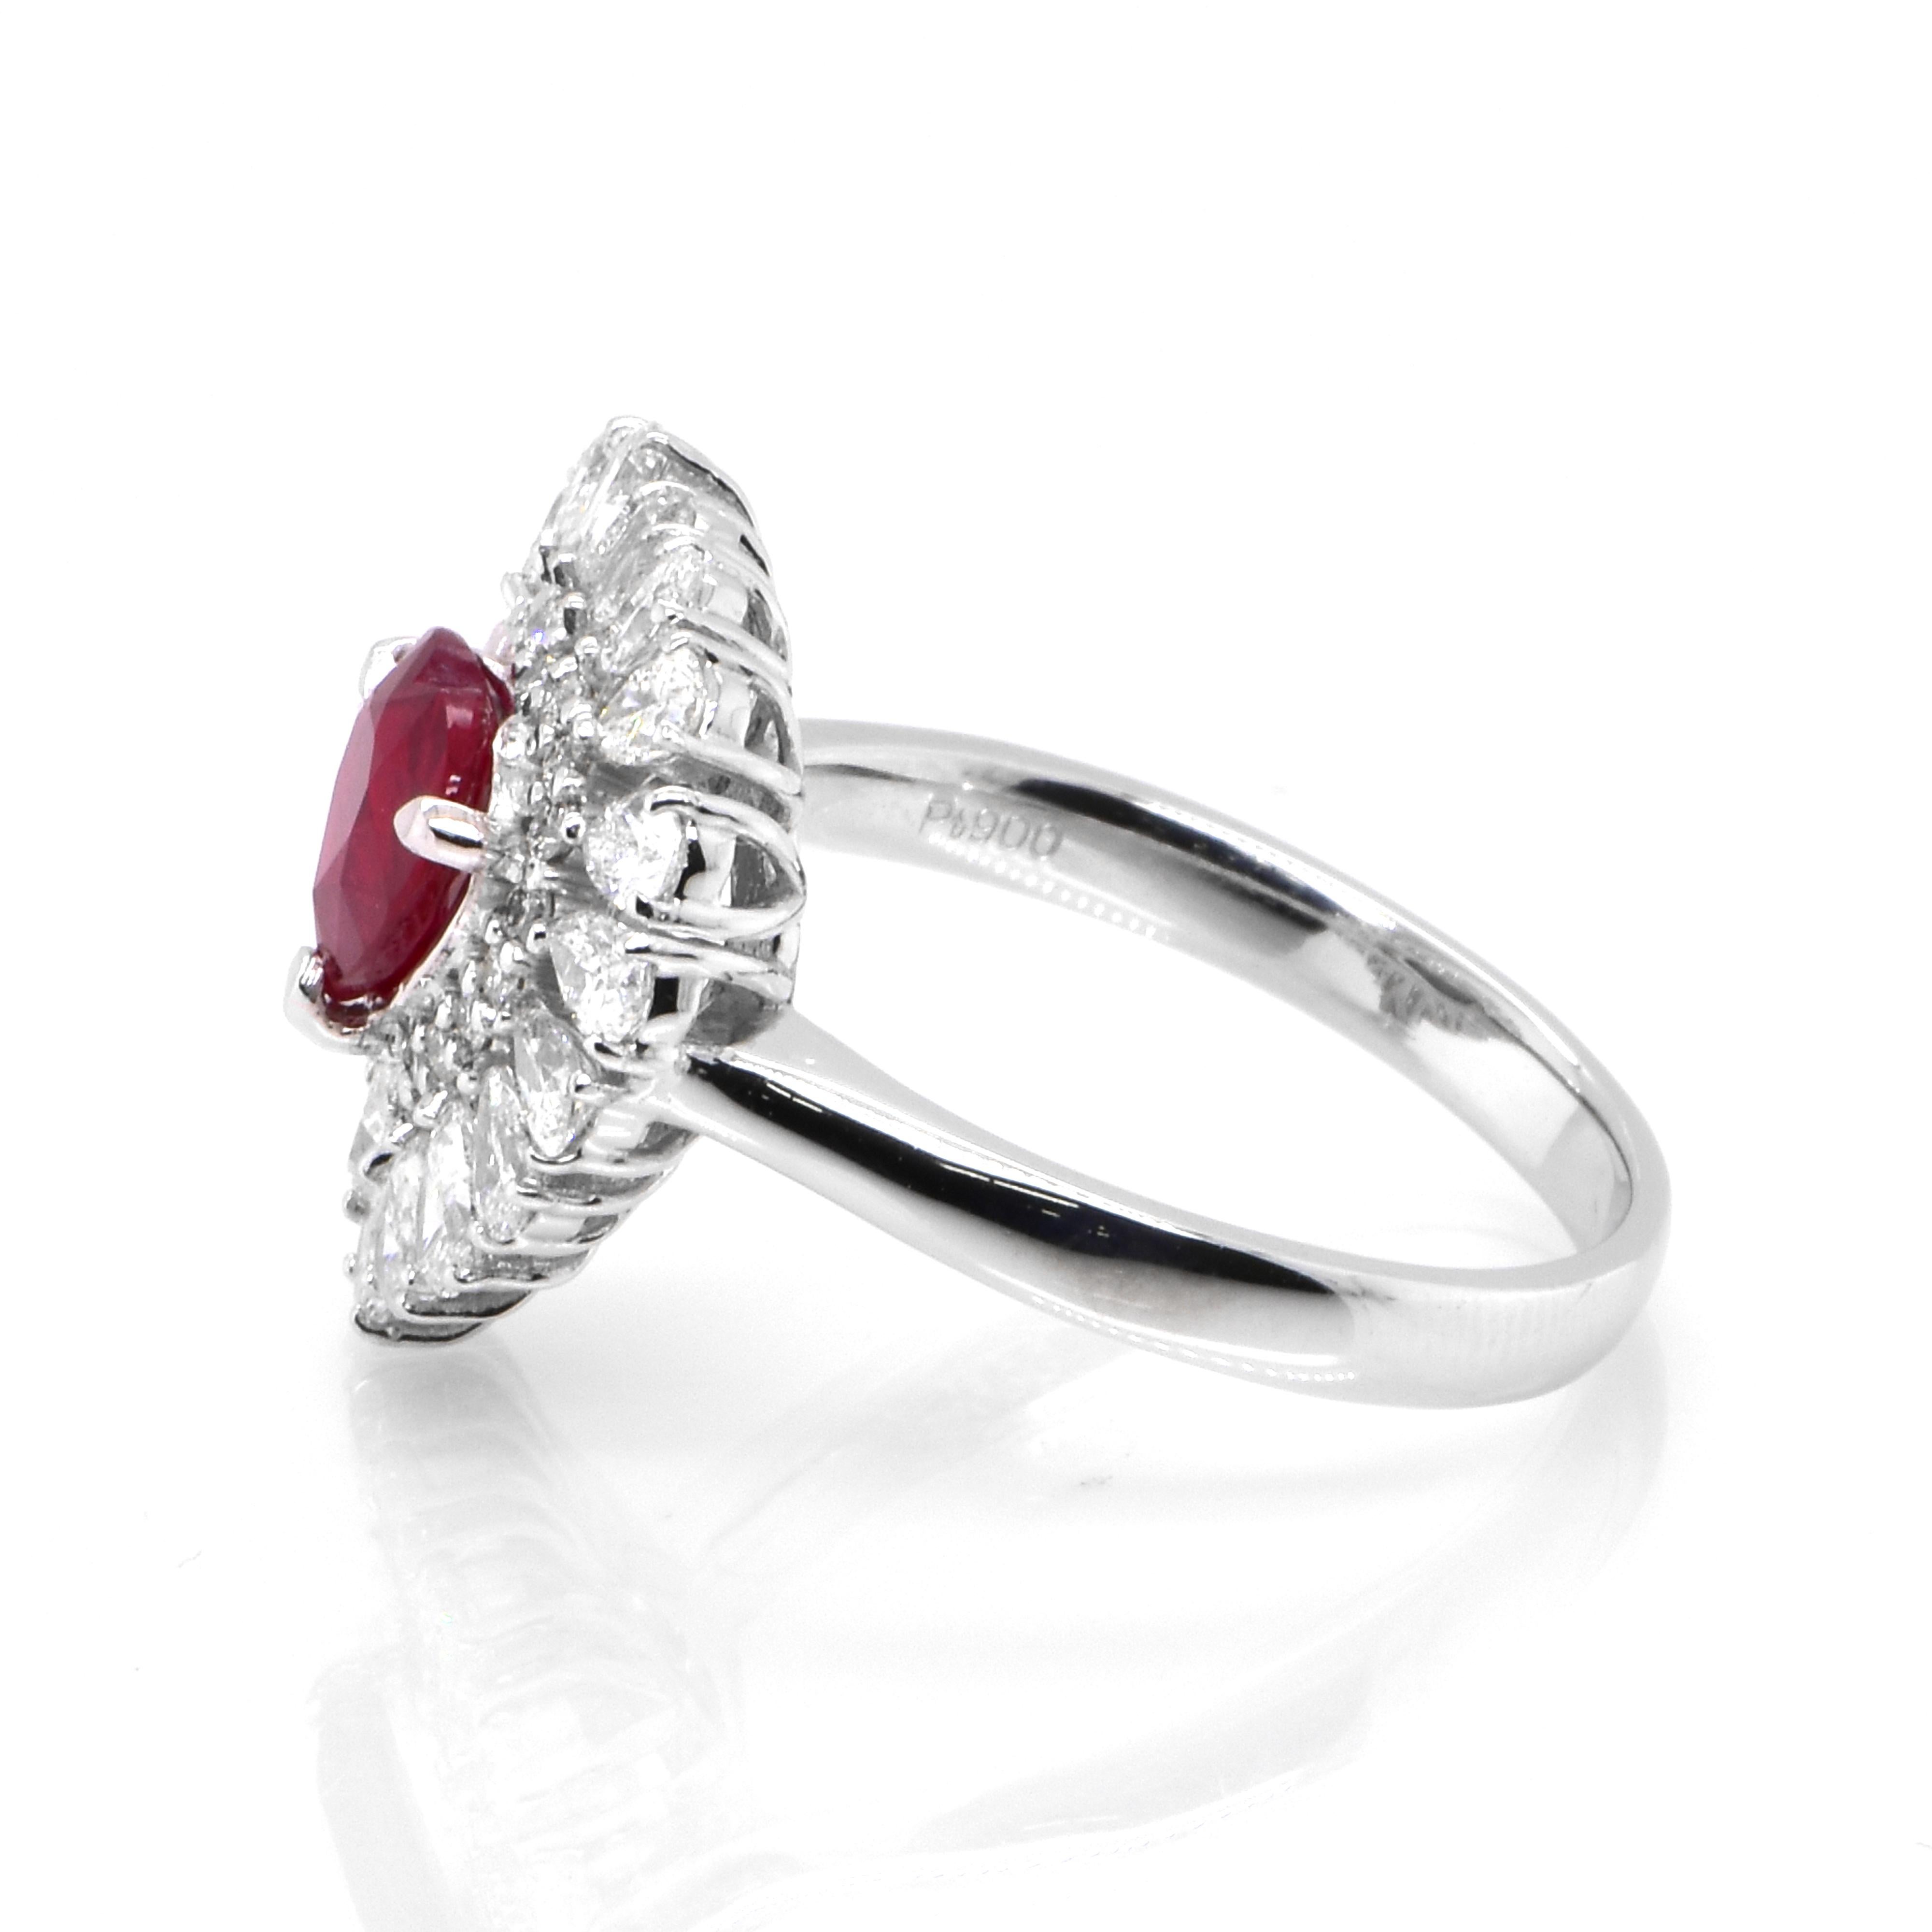 Heart Cut GIA Certified 1.01 Carat, Pigeon Blood Red, Burmese Ruby Ring Made in Platinum For Sale